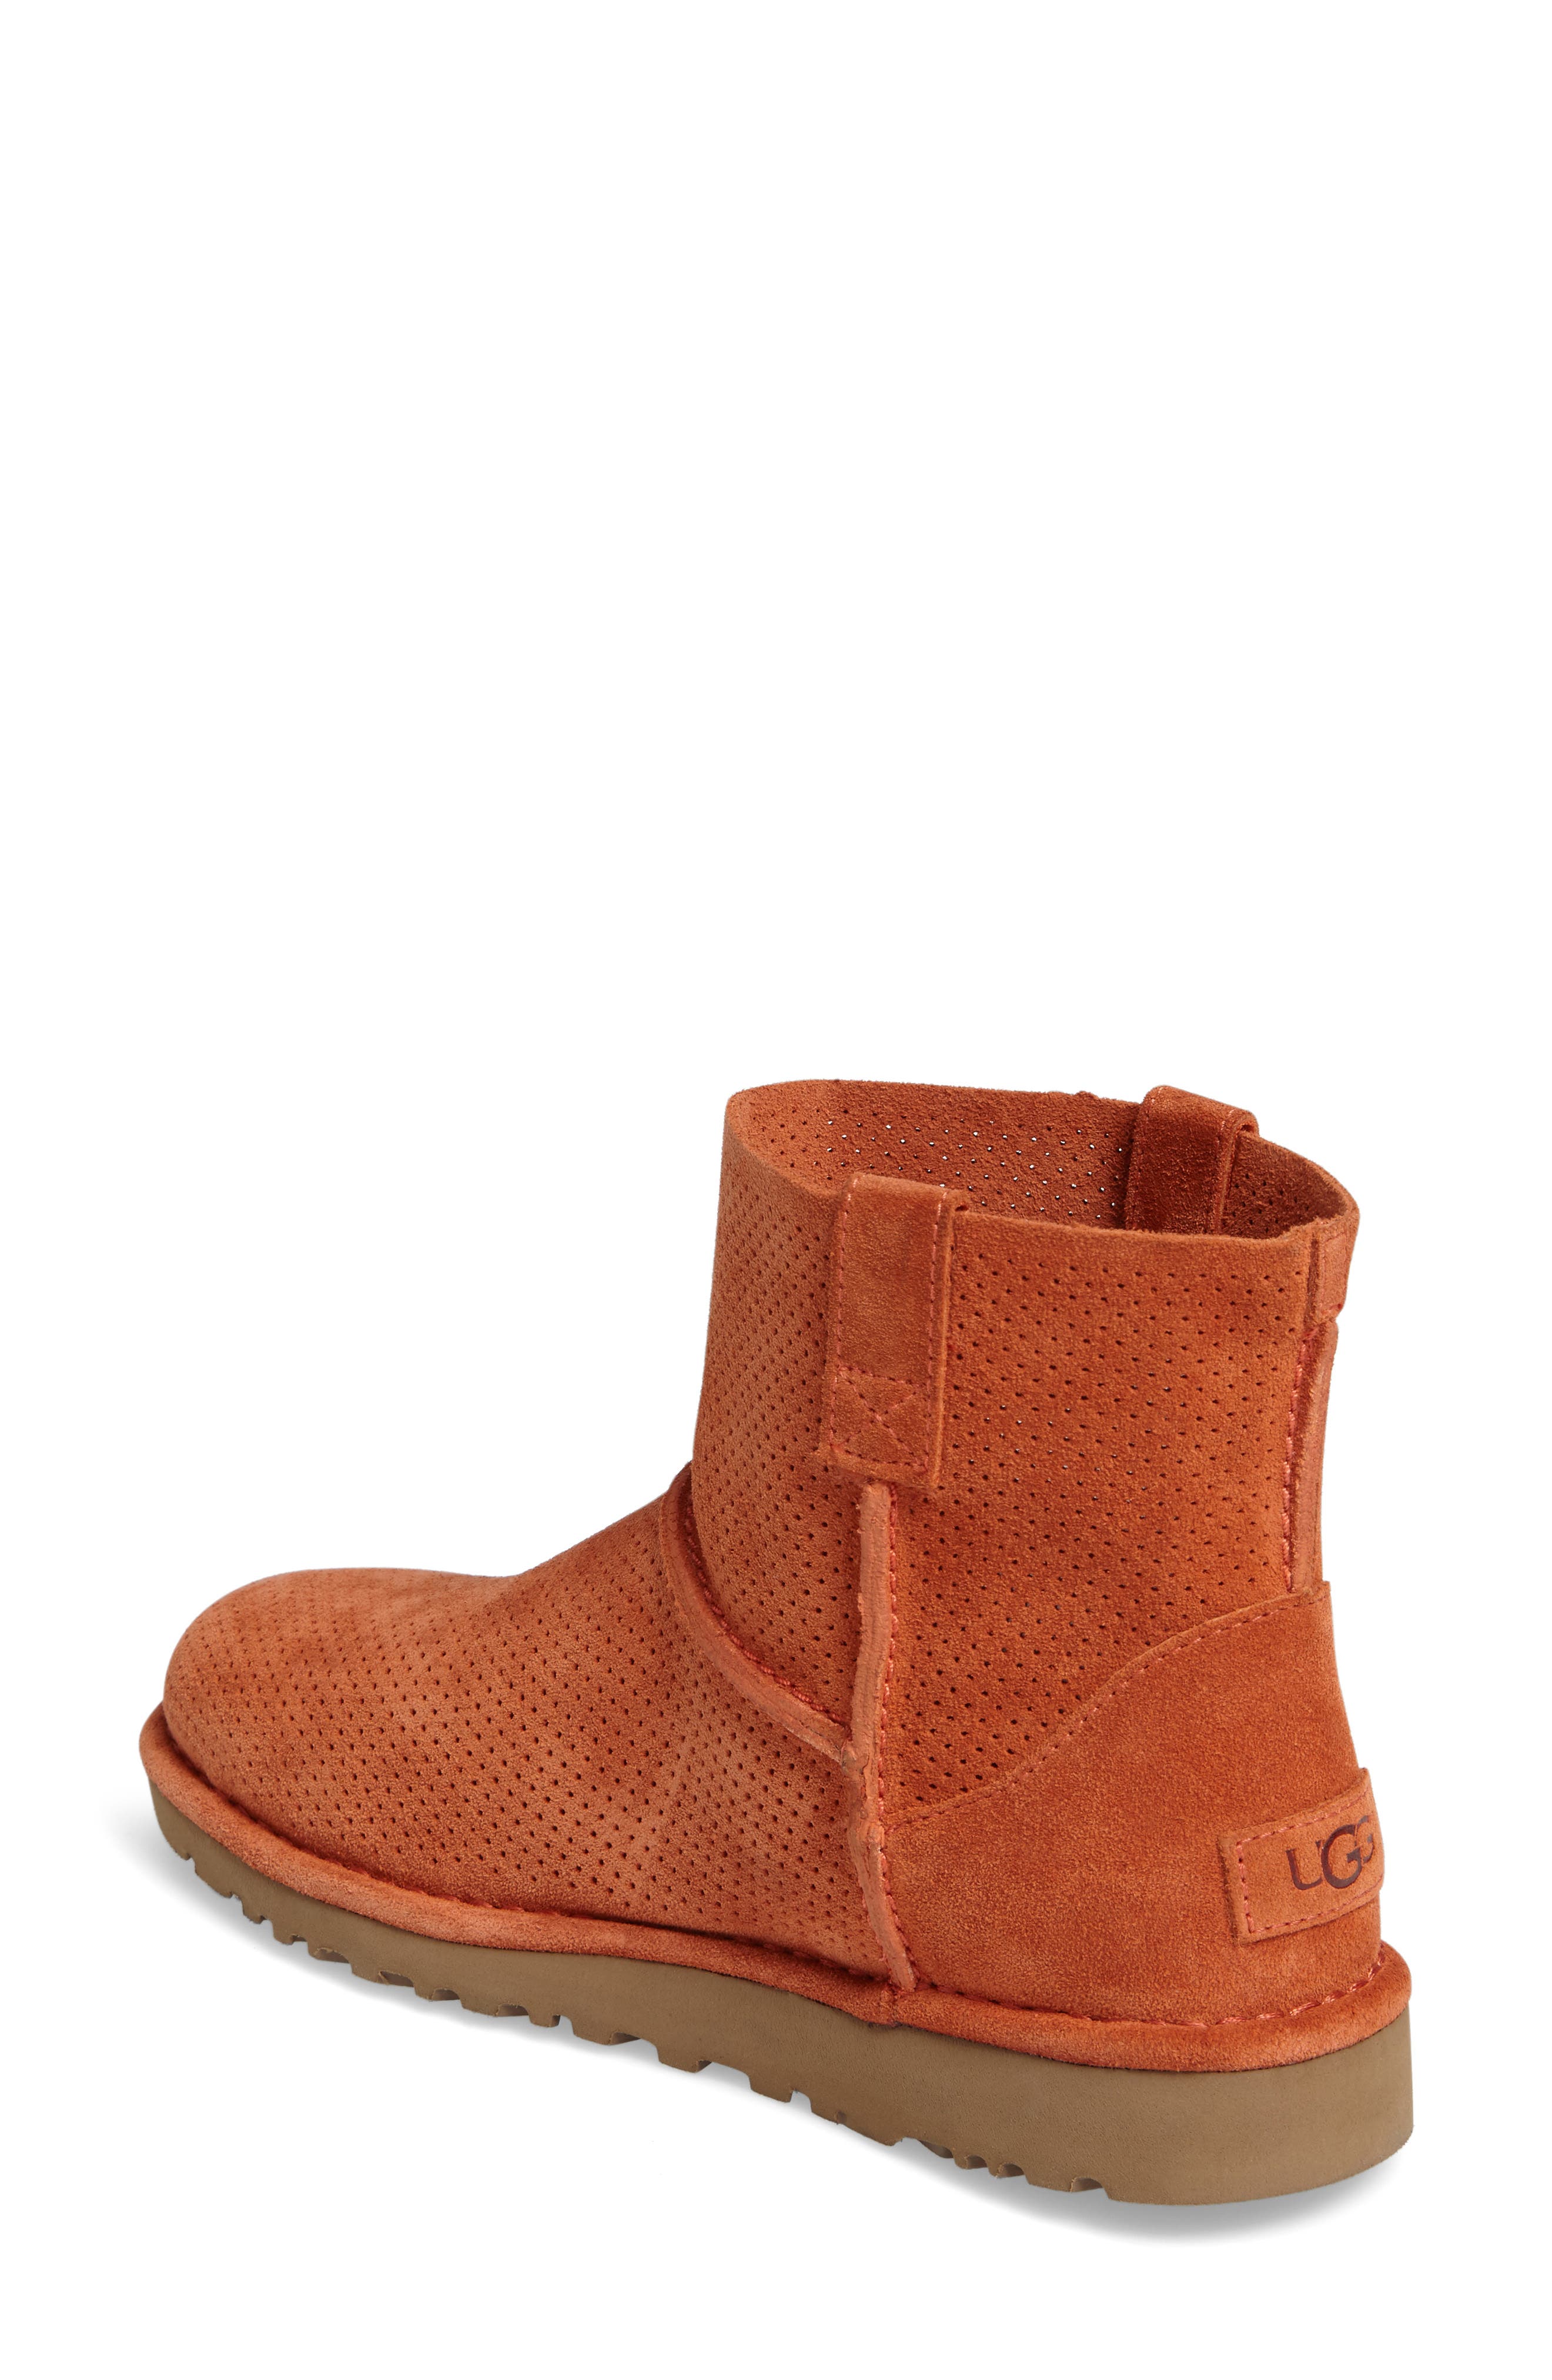 ugg unlined perforated boot